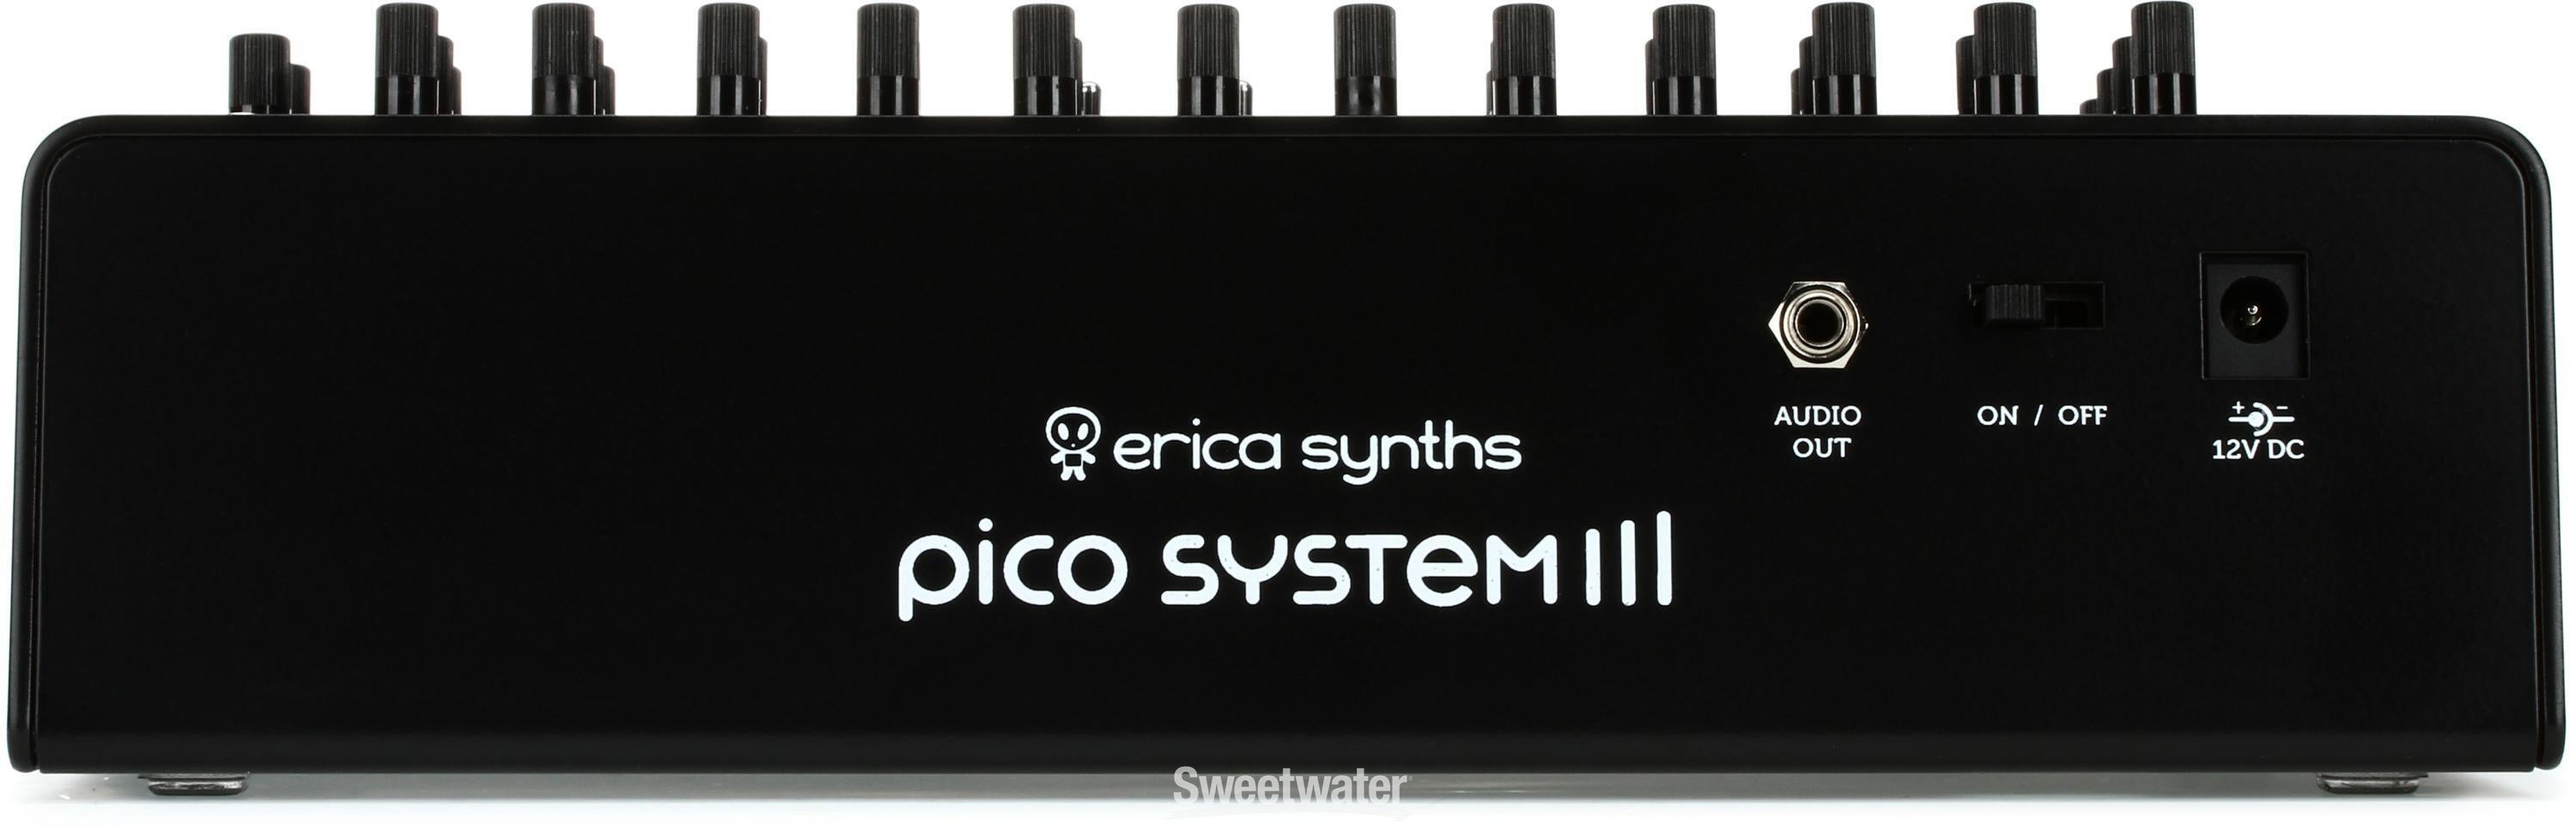 Erica Synths Pico System III Modular Desktop System | Sweetwater